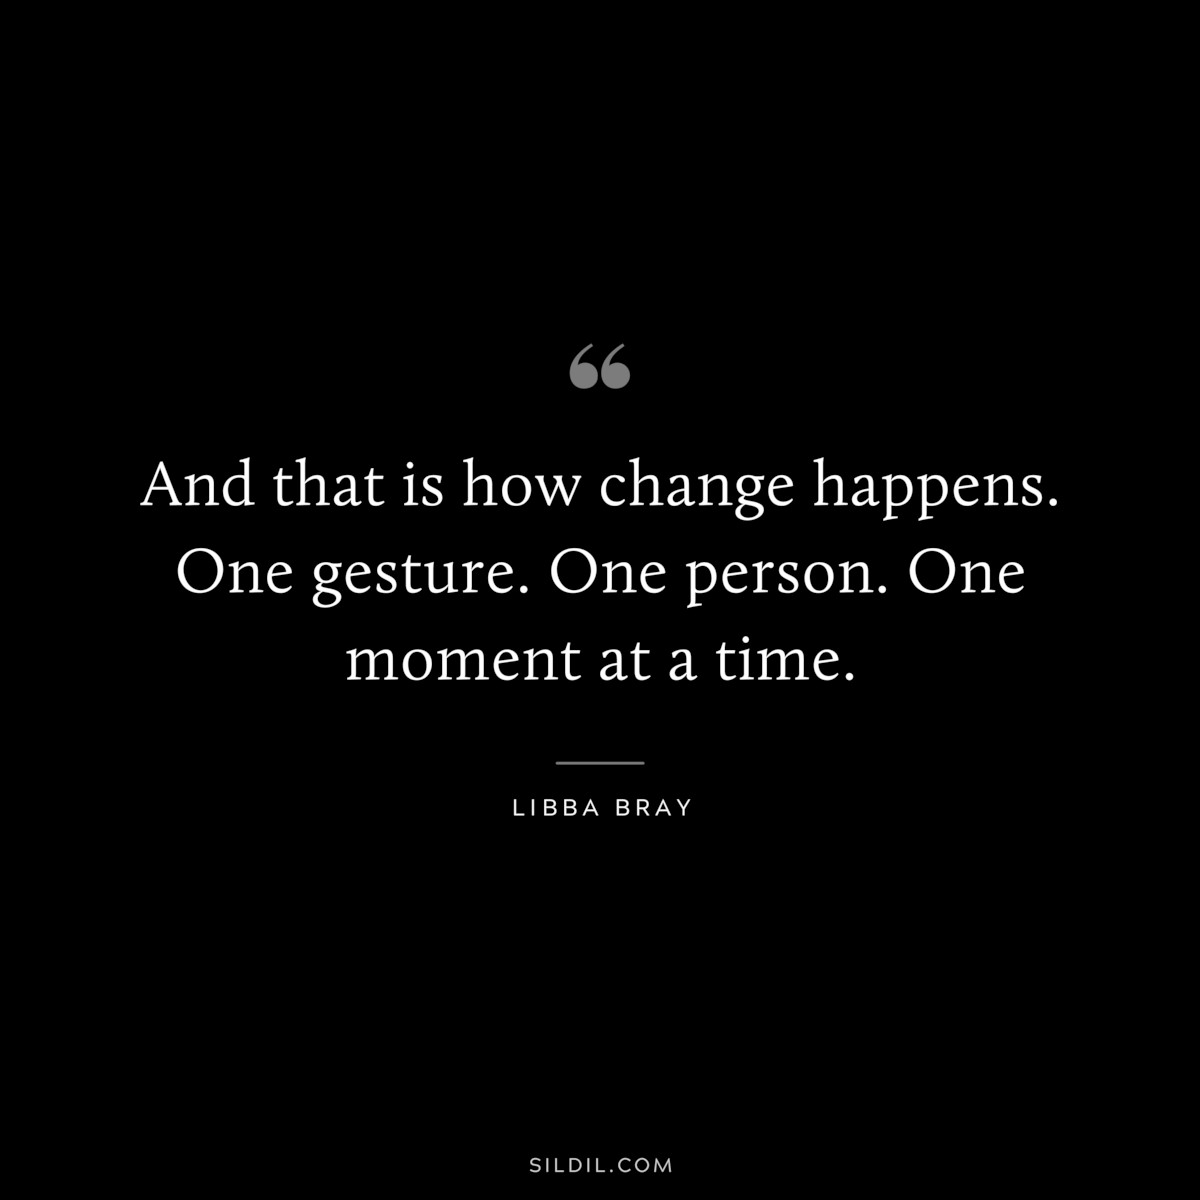 And that is how change happens. One gesture. One person. One moment at a time. ― Libba Bray